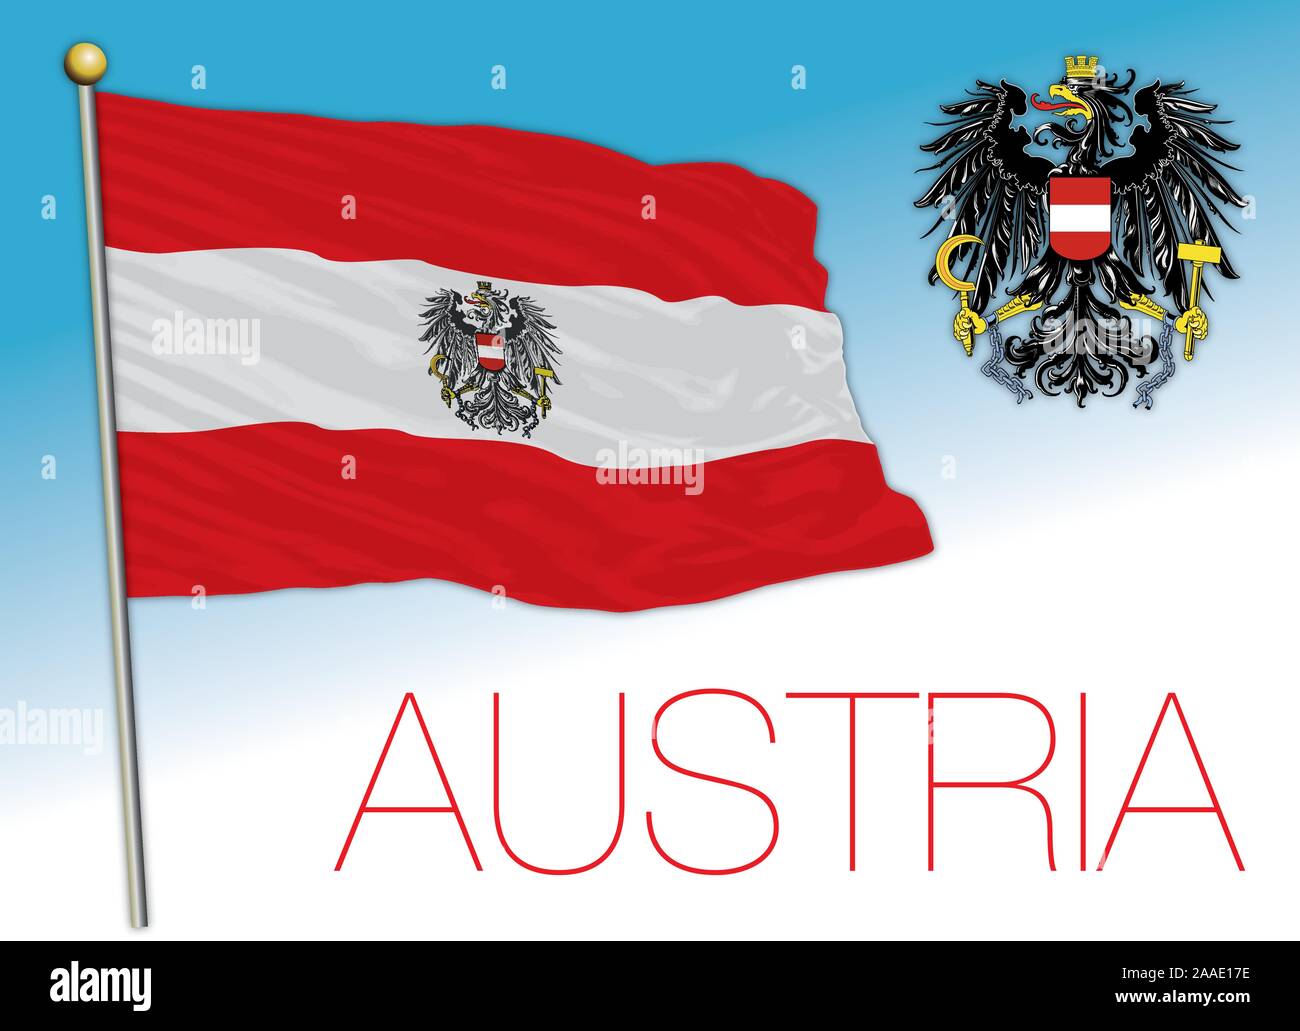 Austria official national flag and coat of arms, vector illustration Stock Vector